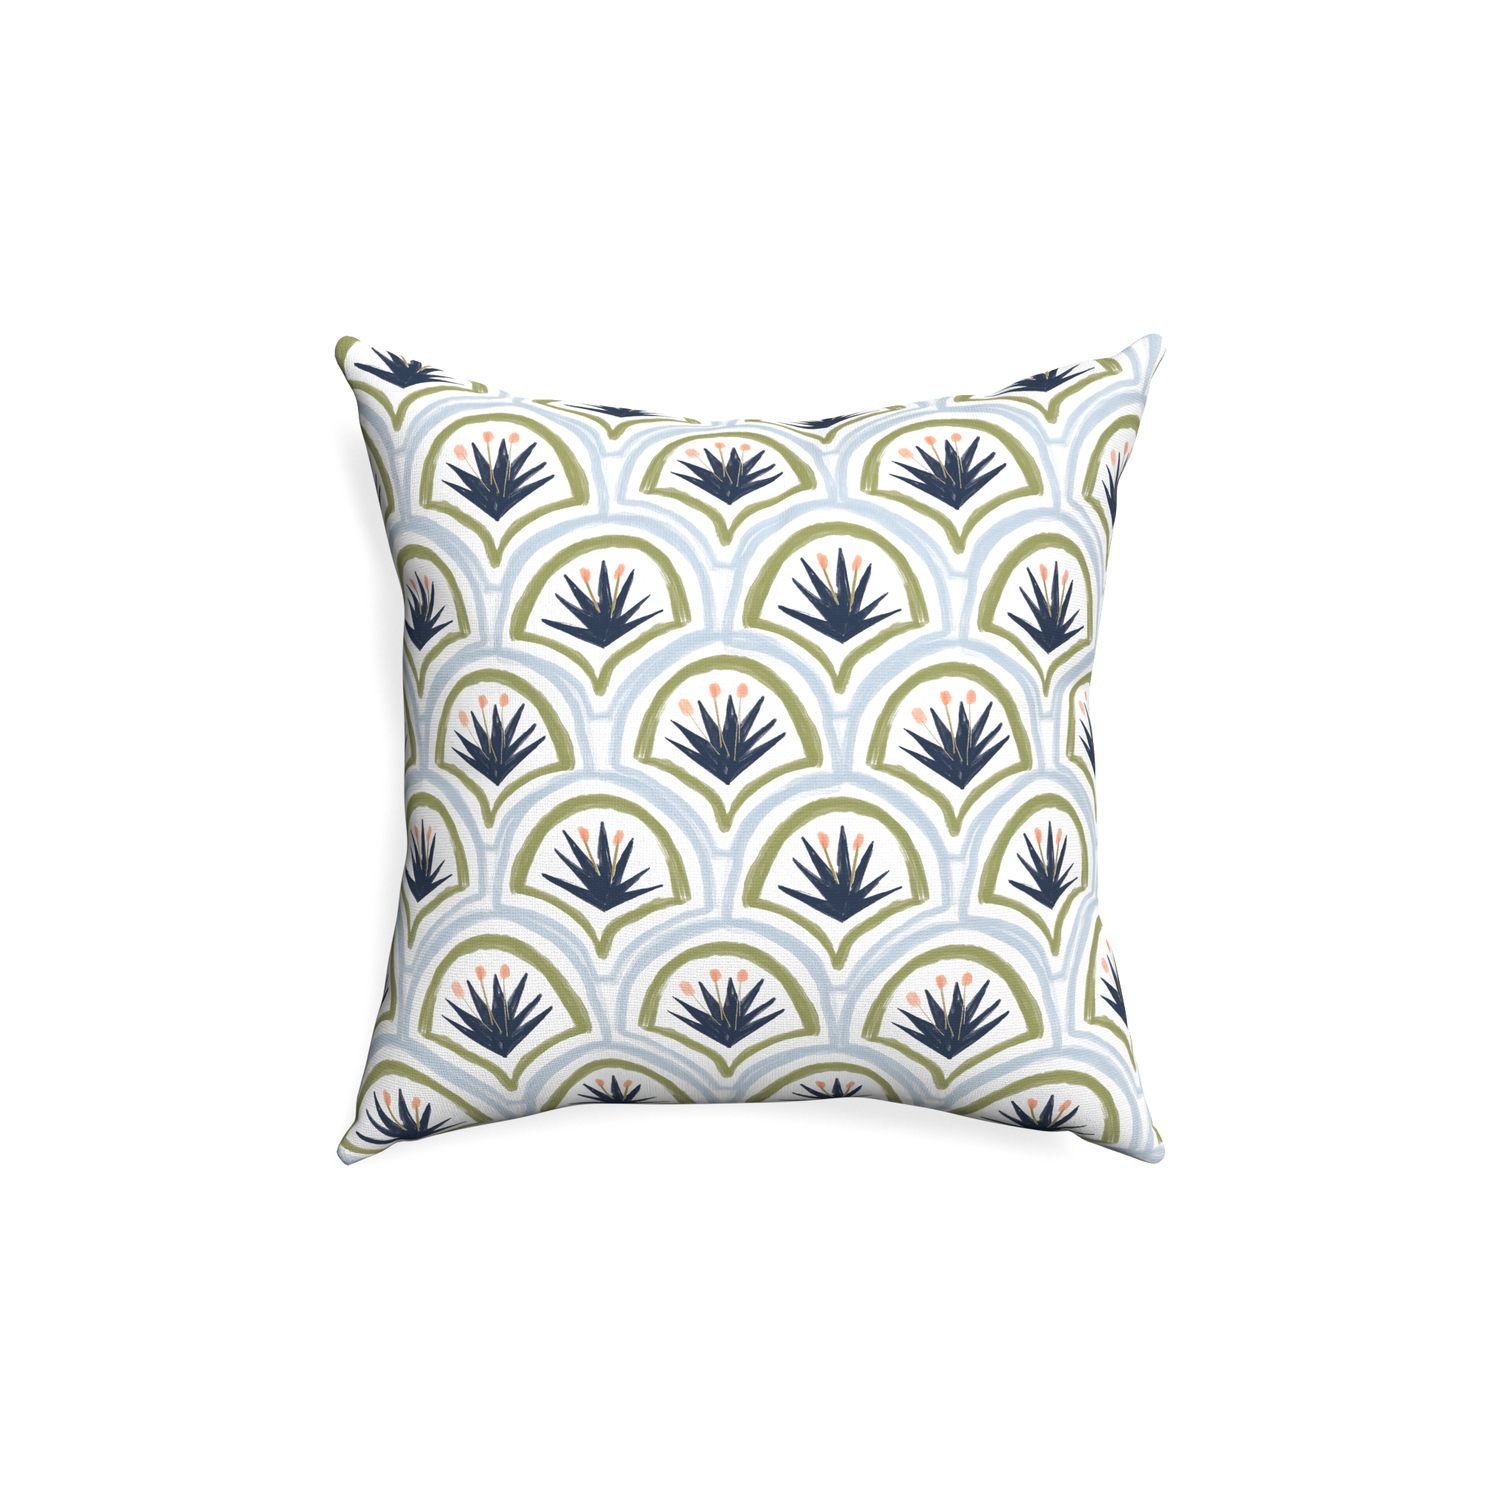 18-square thatcher midnight custom art deco palm patternpillow with none on white background